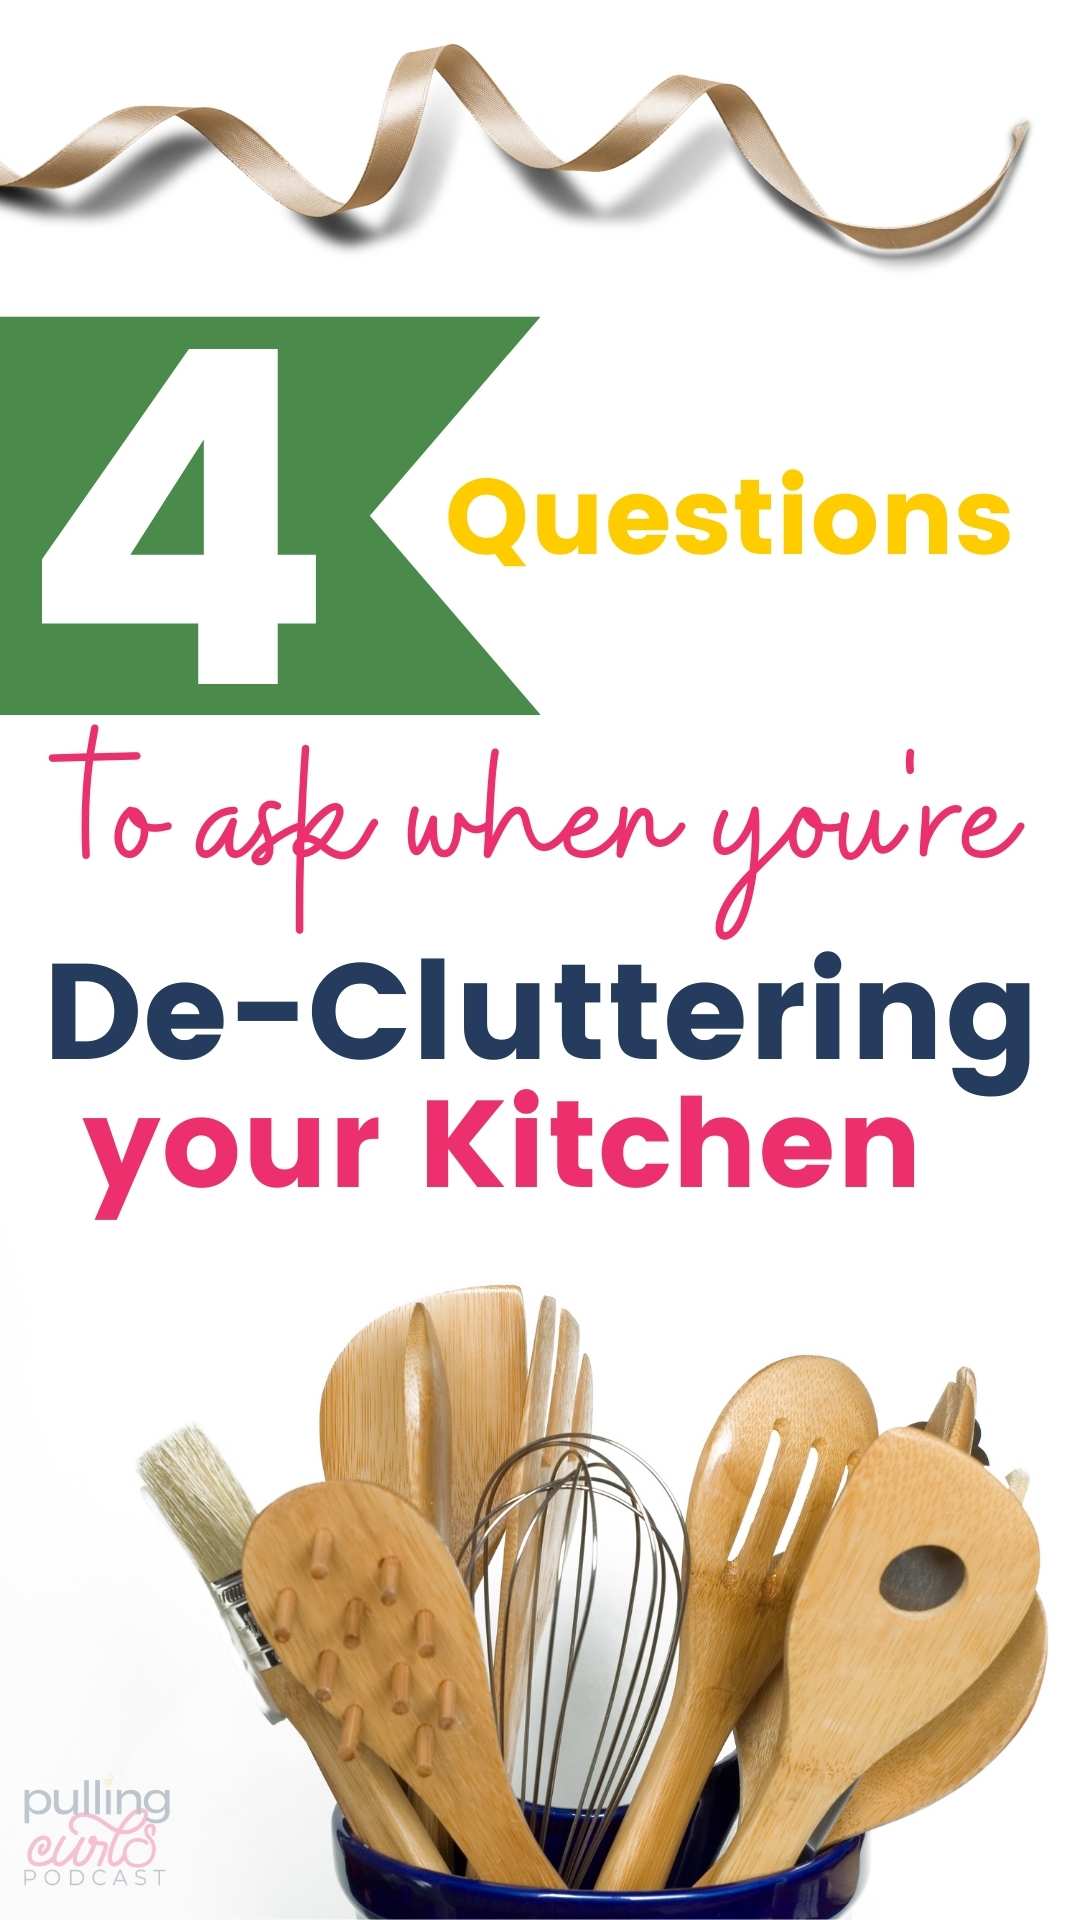 Deciding what you really need and don't need in your kitchen is so important and hard! Let's talk about decluttering the kitchen. via @pullingcurls